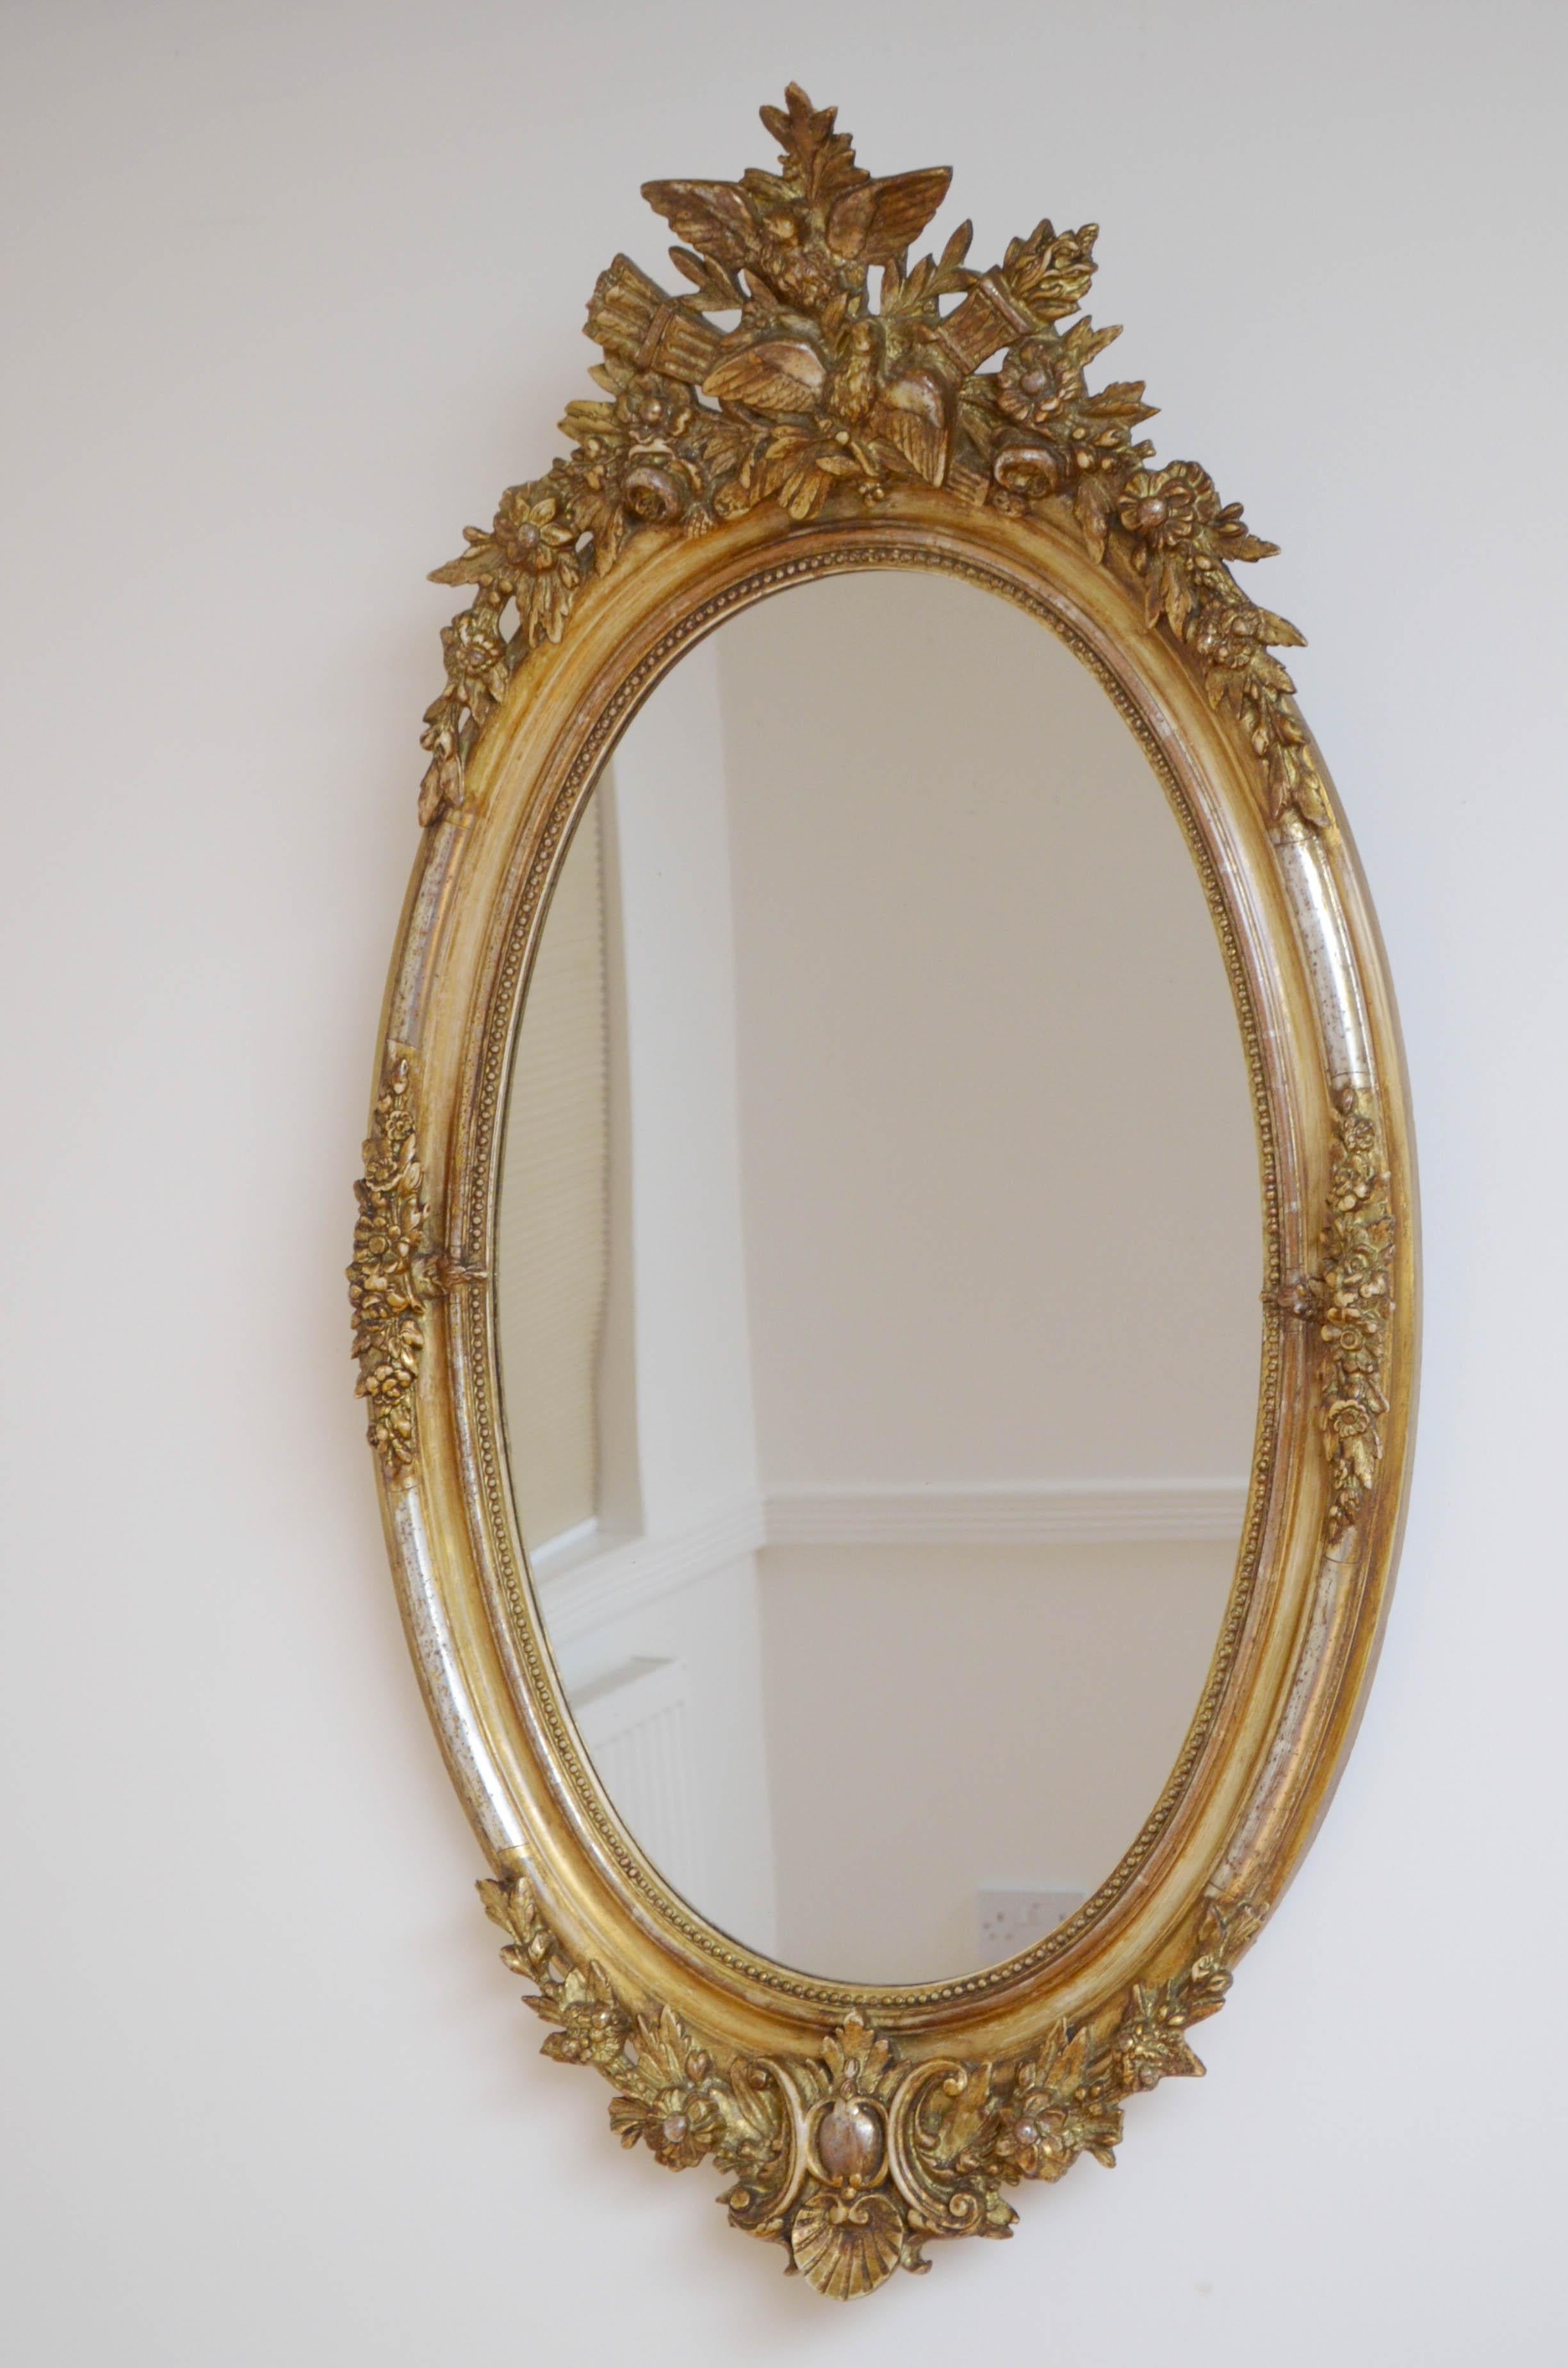 Sn4714 Attractive French mirror with original glass with some foxing in finely decorated silver frame with centre crest. This antique mirror is in original condition throughout, ready to place at home, circa 1870

Measures: H45.5? W24.5?